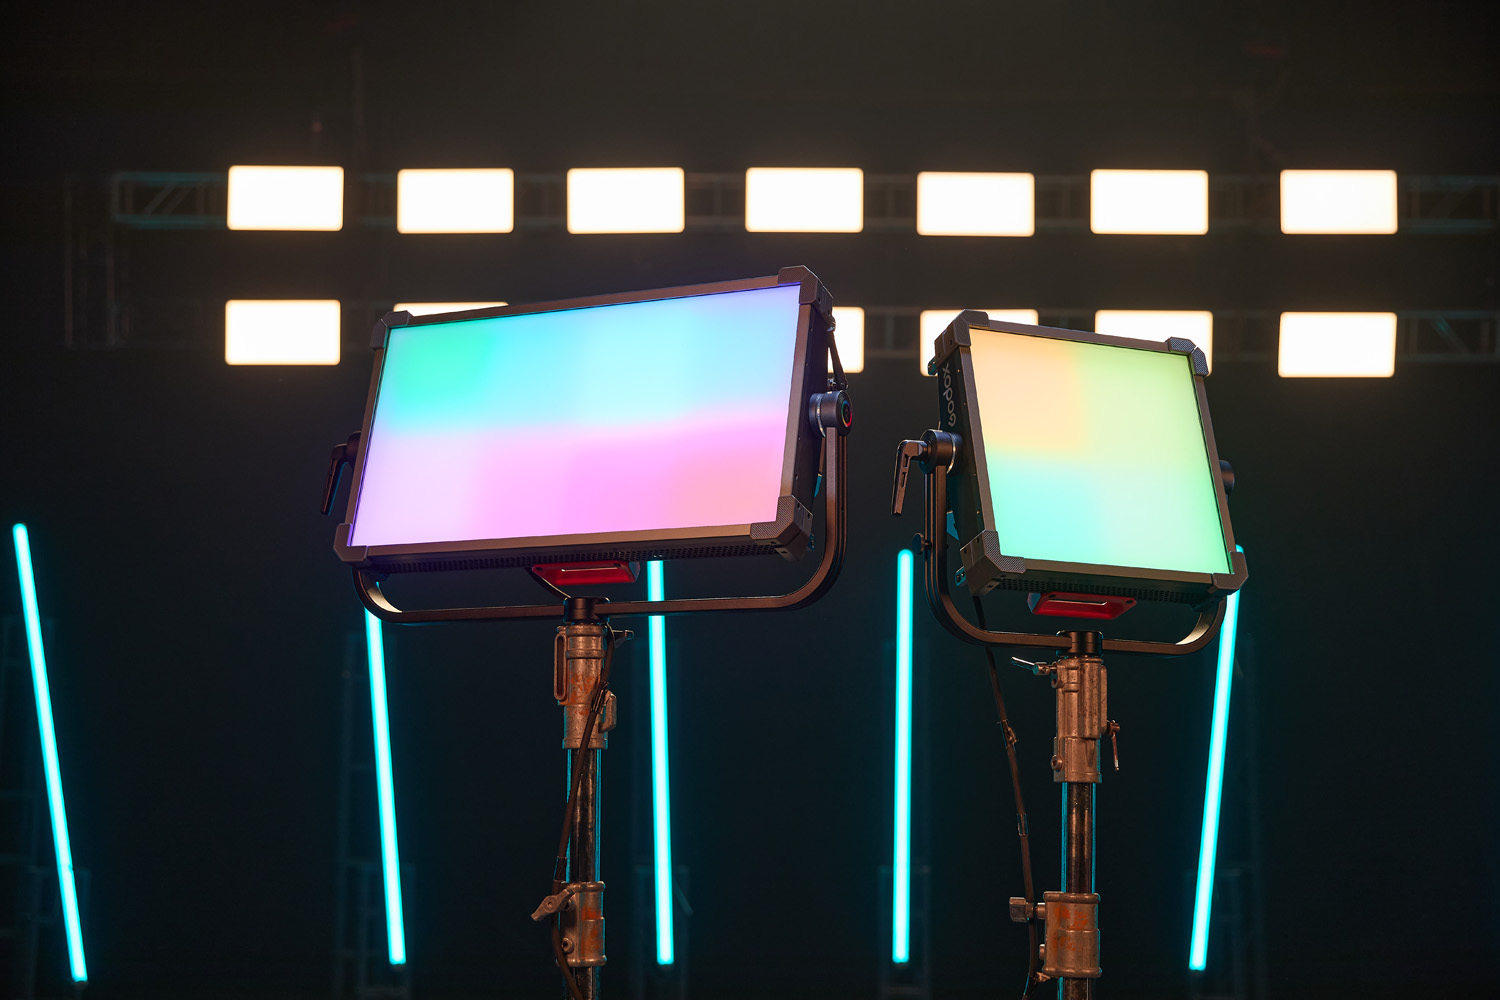 Godox P300R and P600R panel lights positioned in studio environment